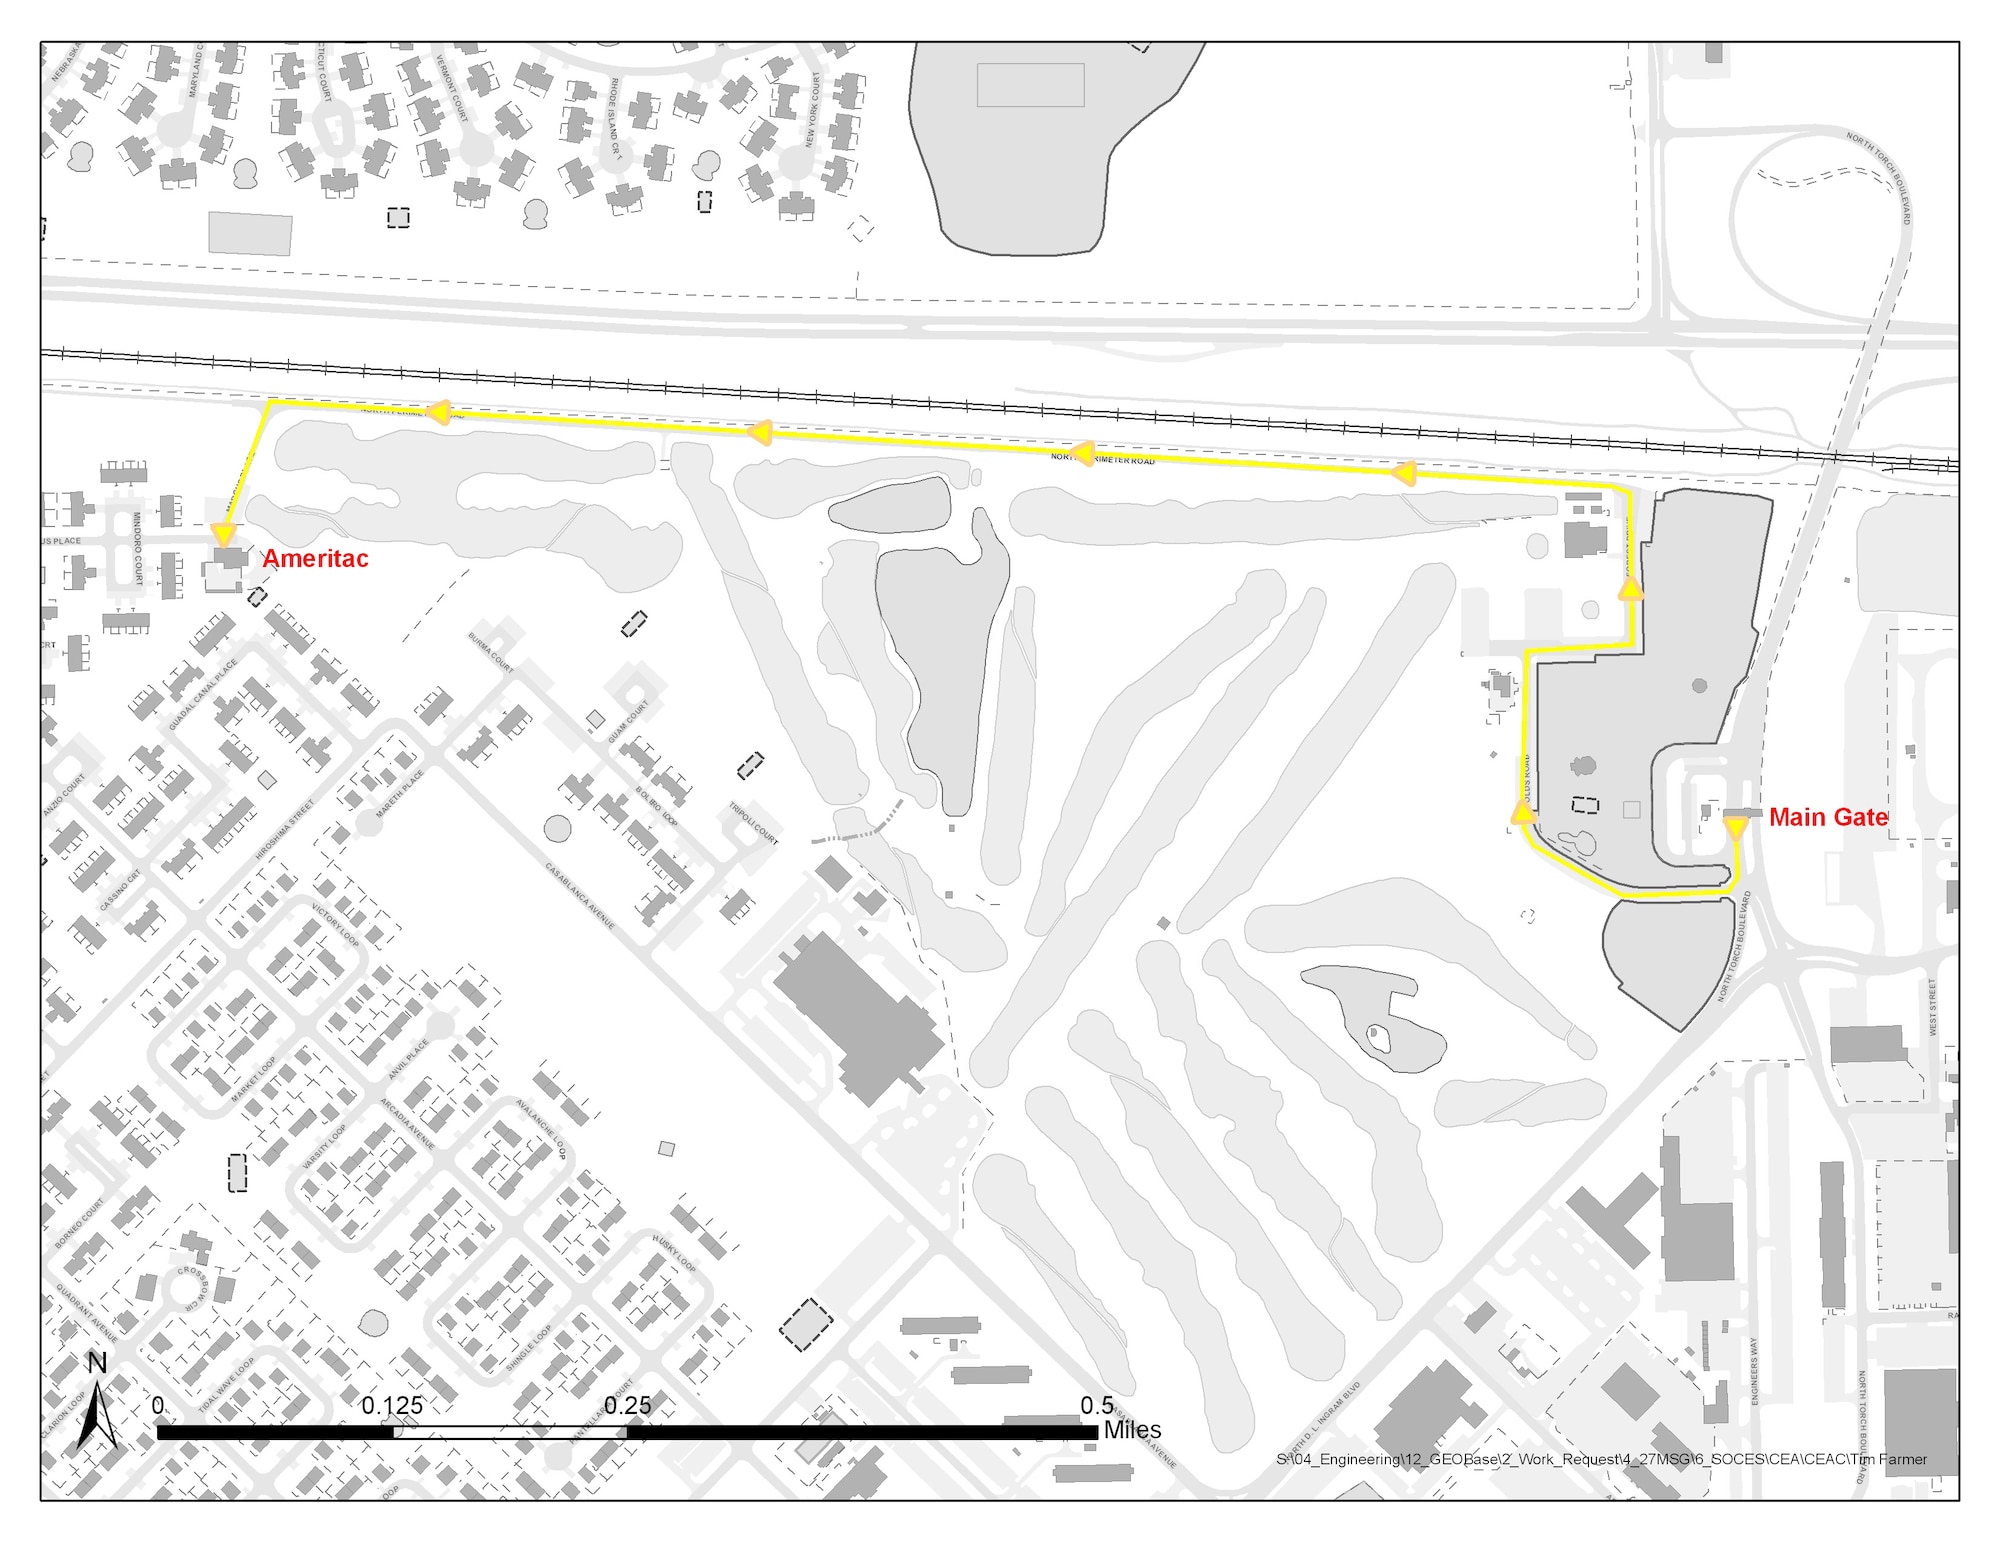 CANNON AIR FORCE BASE, N.M. - Due to ongoing construction and safety concerns, the only approved route to Ameritac (housing maintenance) is highlighted by the yellow line shown in the picture. To get to Ameritac, go behind the golf course at the main gate. Going to Ameritac through housing is unauthorized. For more information call 784-8363.